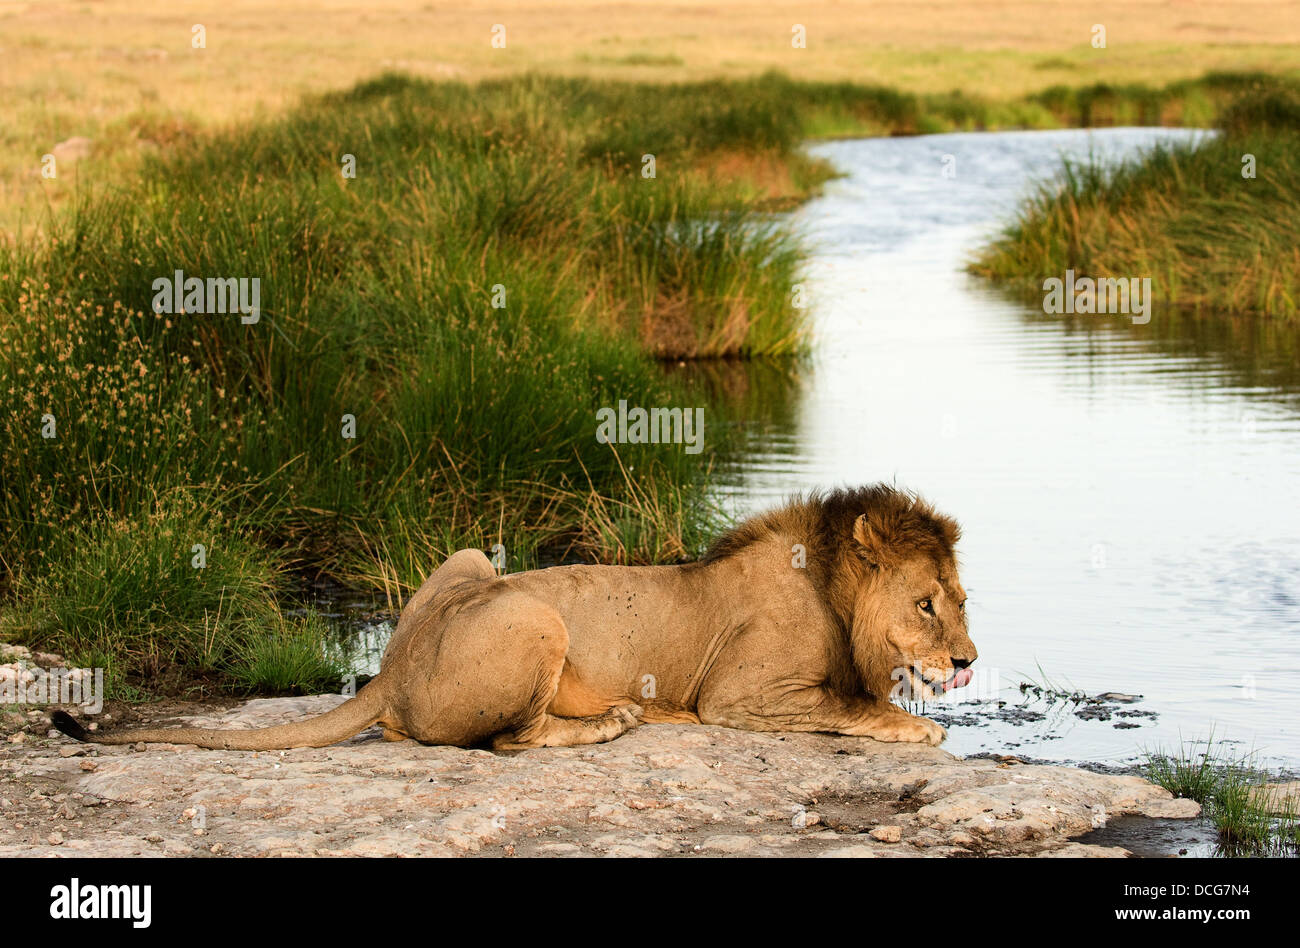 Lion on a watering place Stock Photo